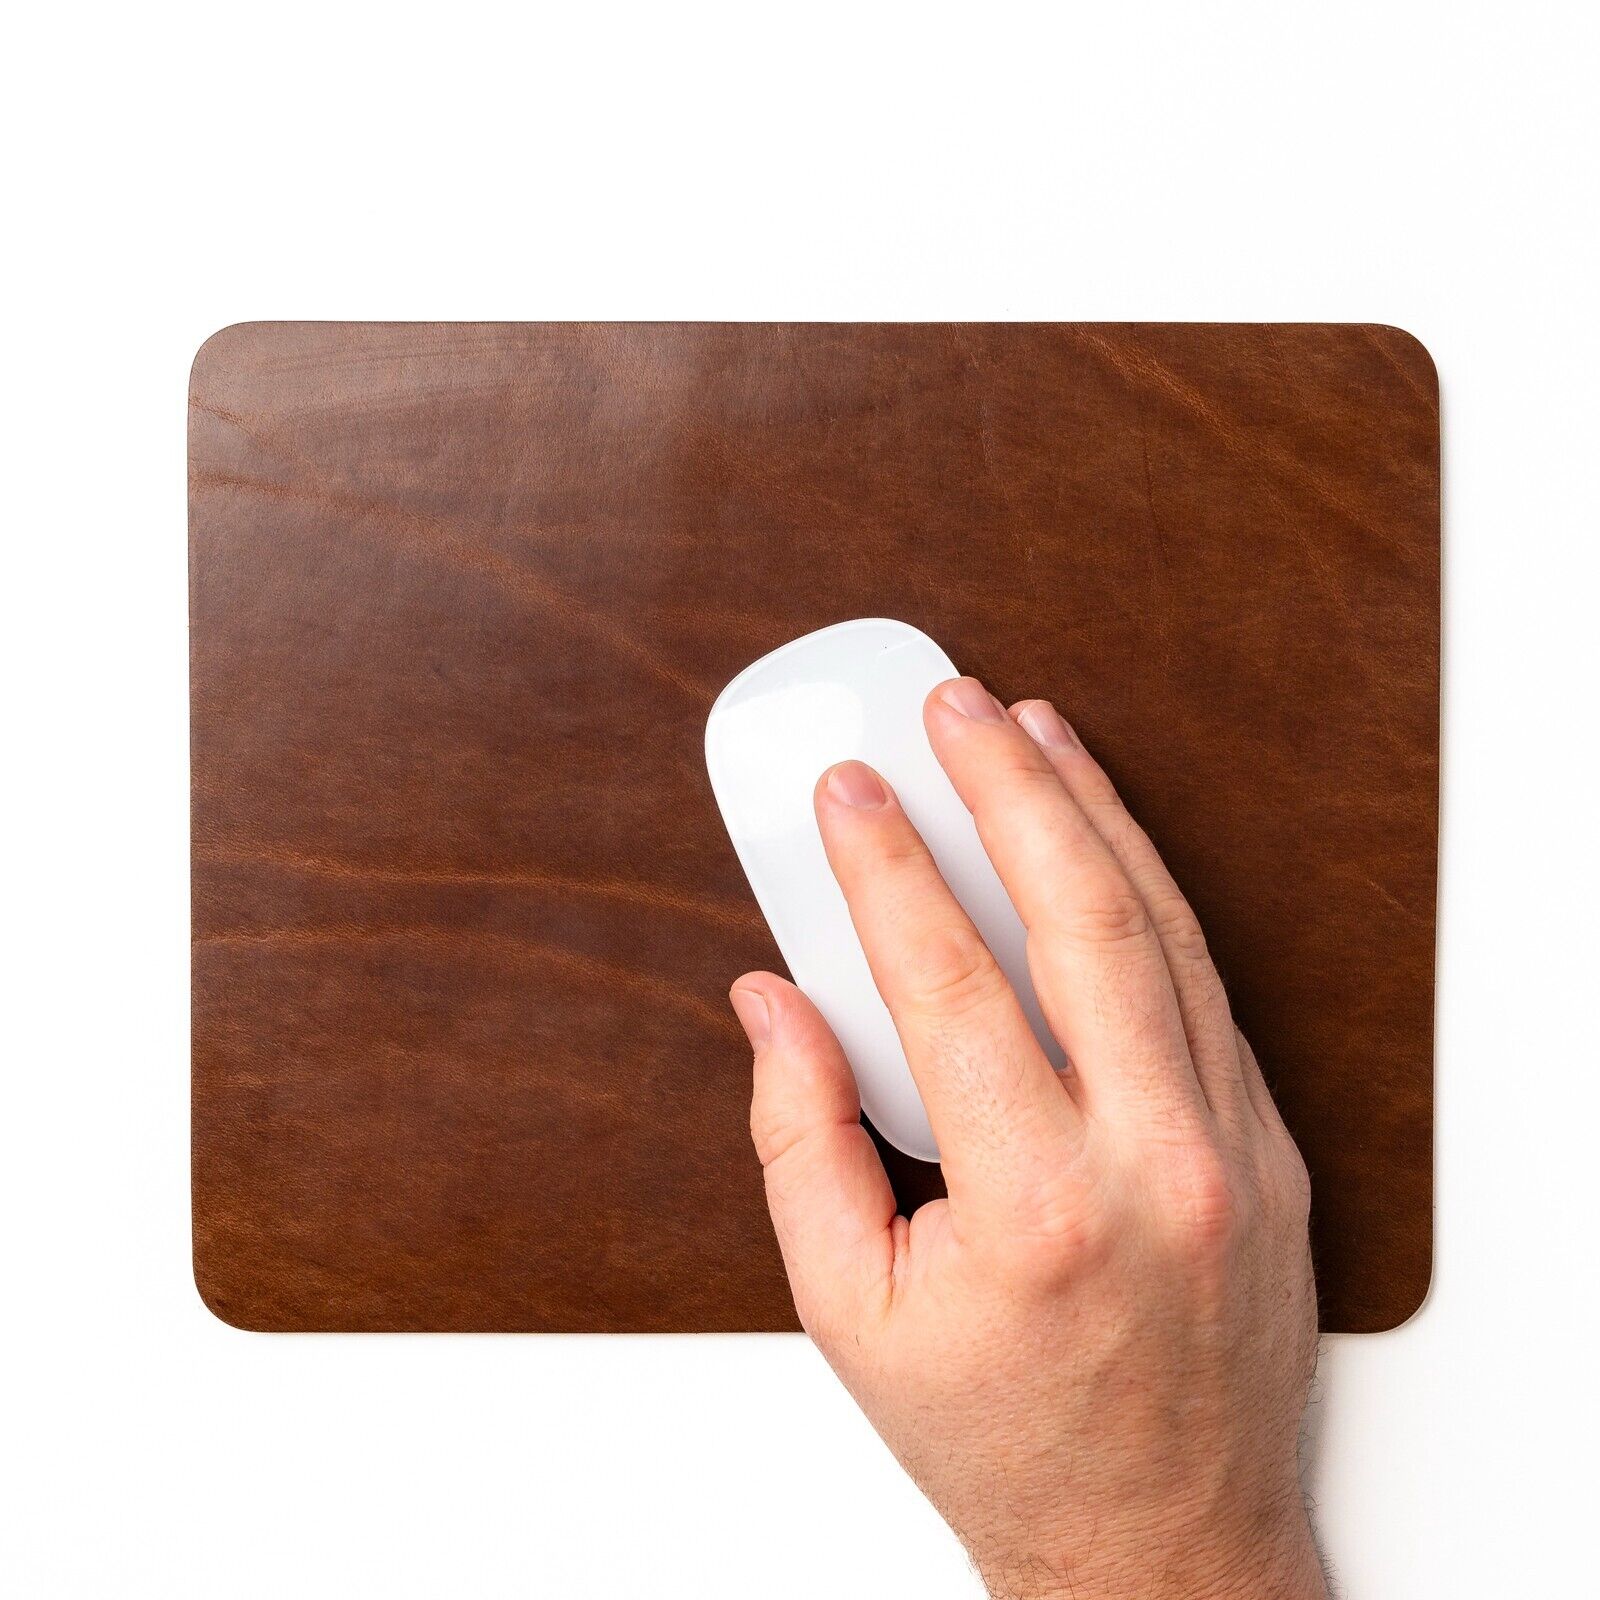 Premium Full Grain Leather Mouse Pad in Natural - Genuine Real Cowhide Leather